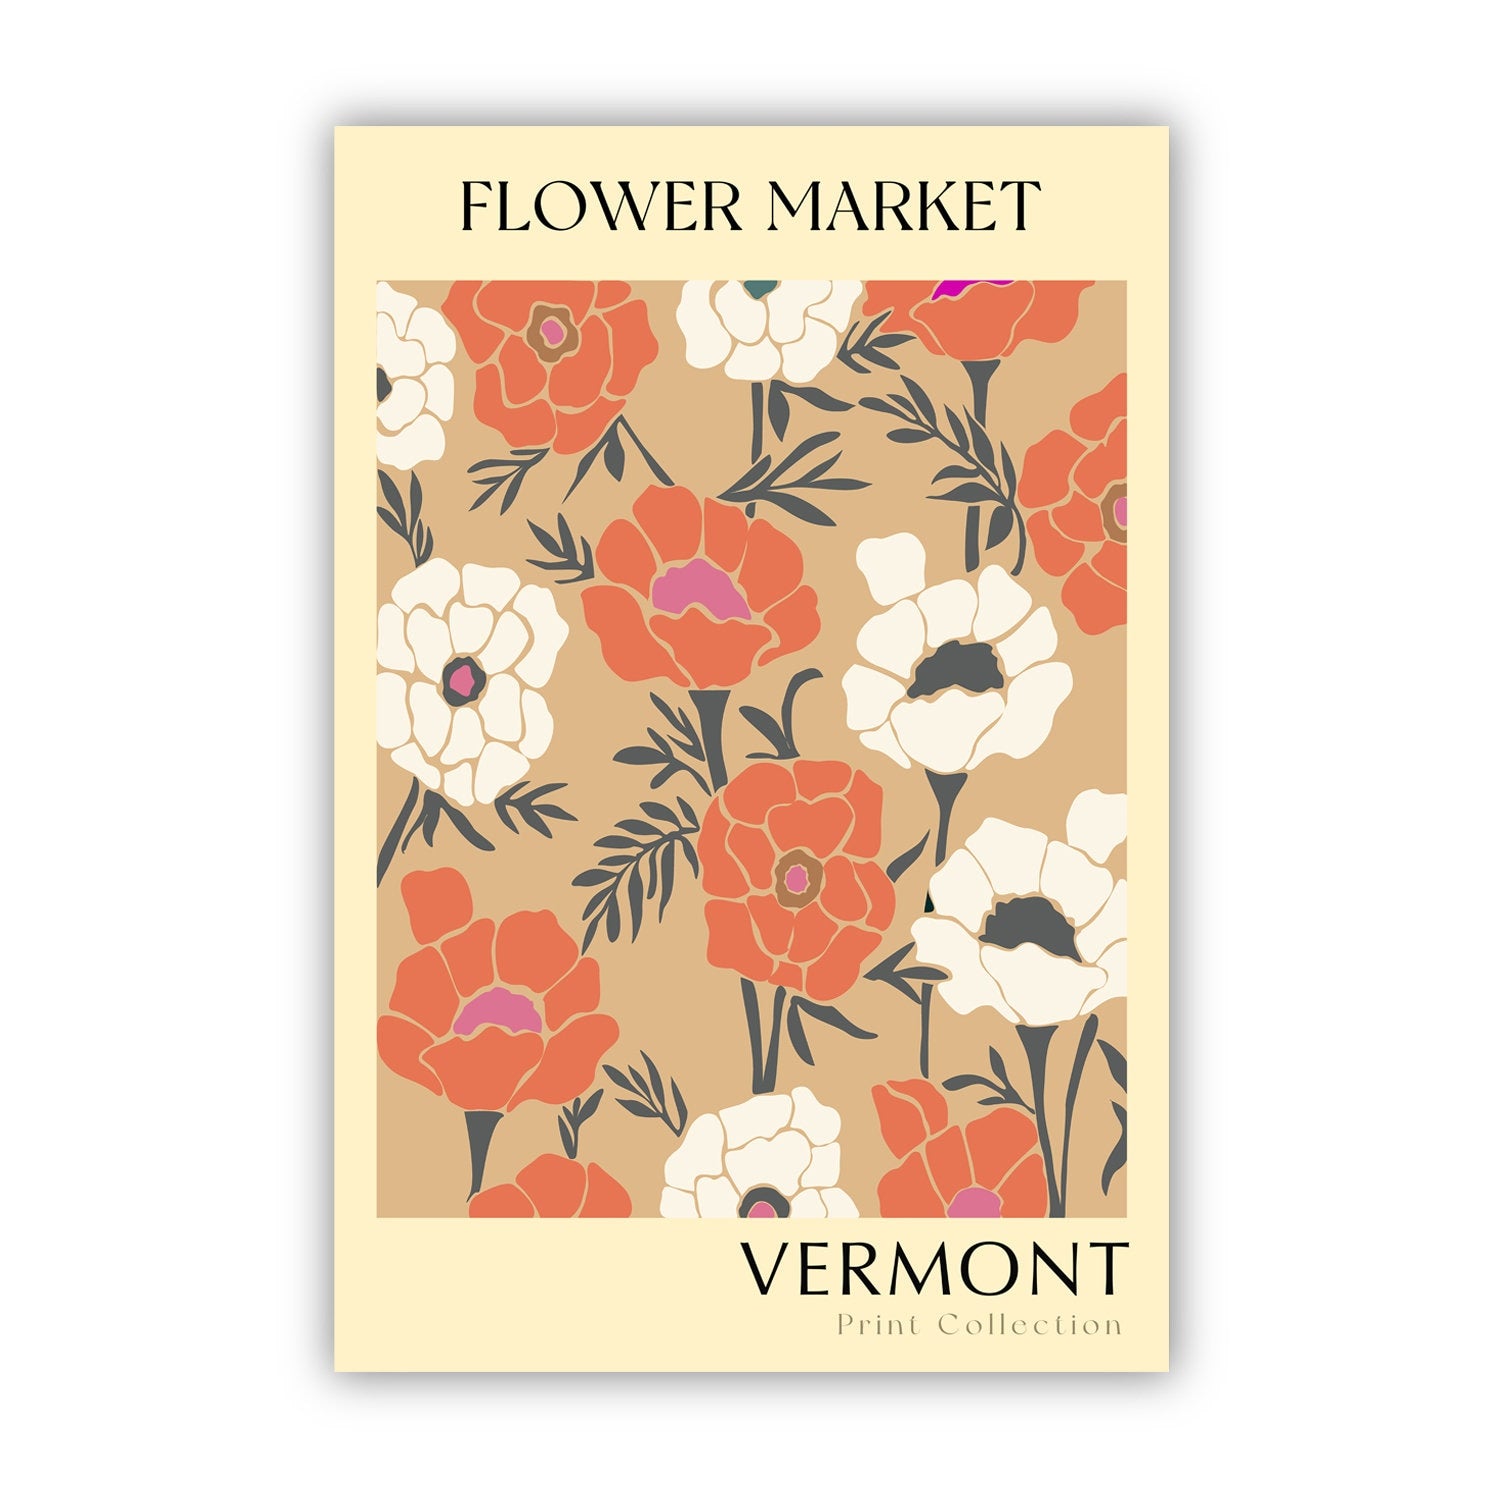 Vermont State flower print, USA states poster, Vermont flower market poster, Botanical poster, Nature poster artwork, Boho floral wall art